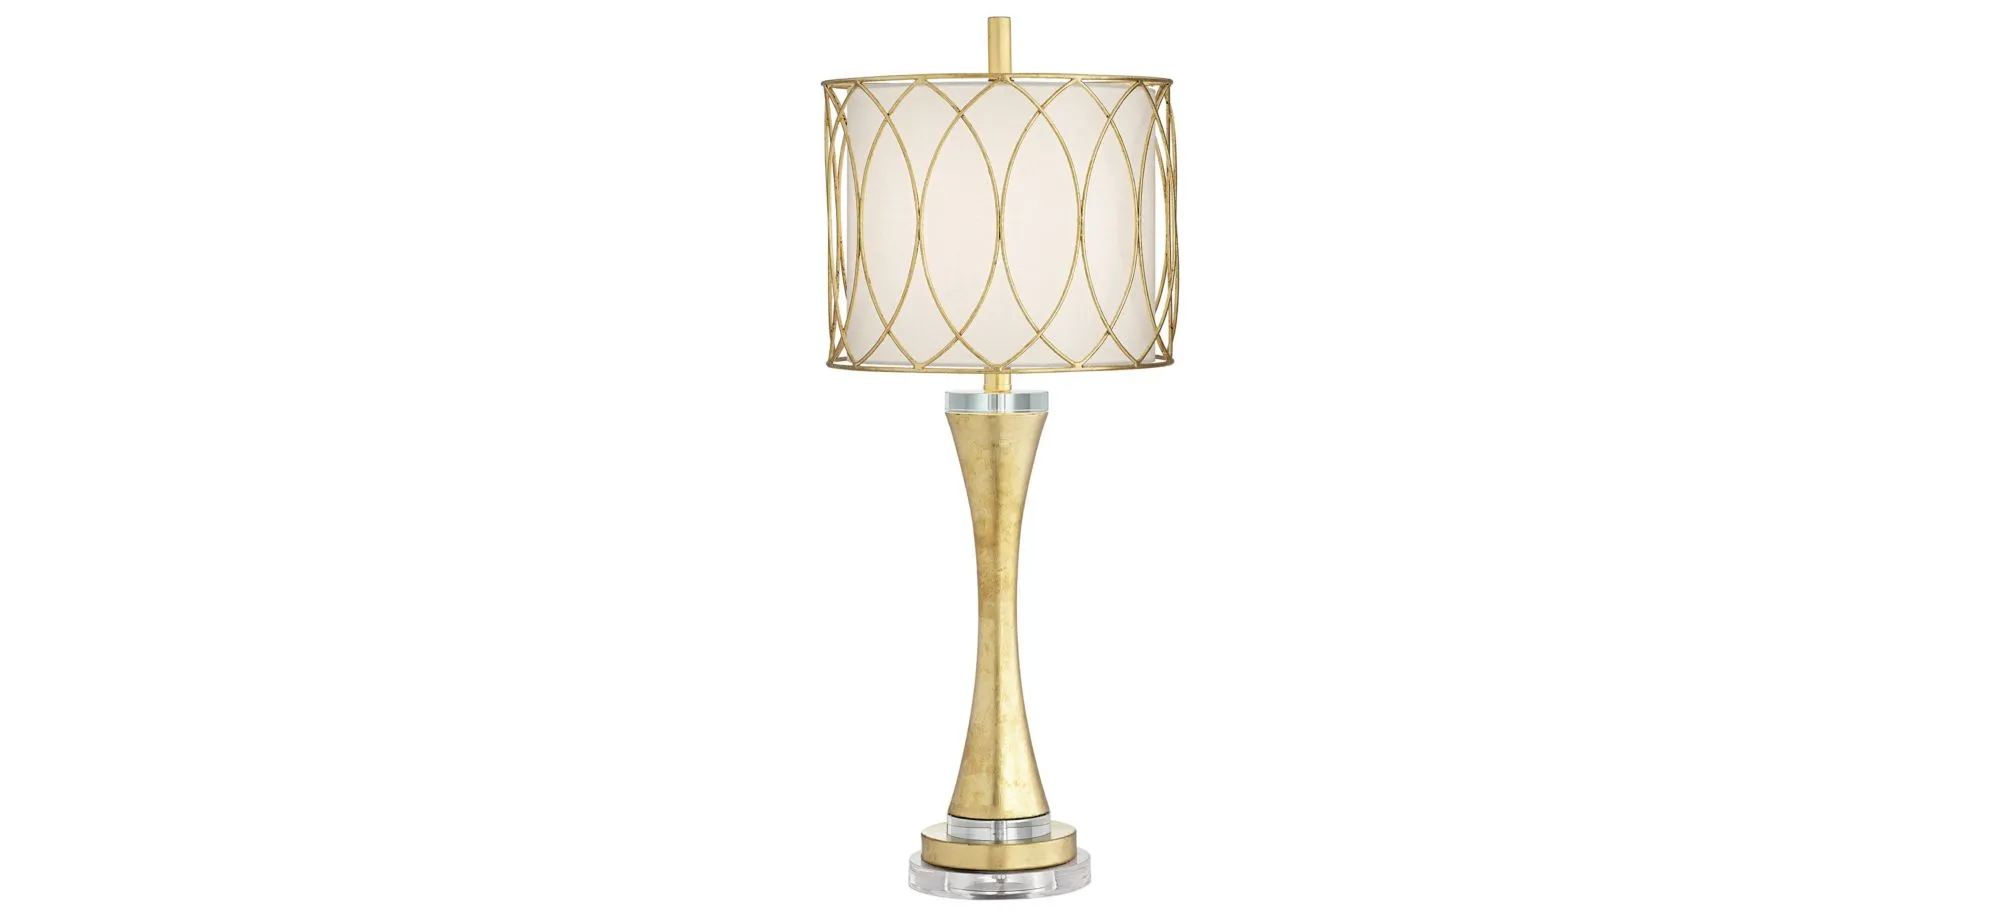 Trevizo Table Lamp in Gold Leaf by Pacific Coast